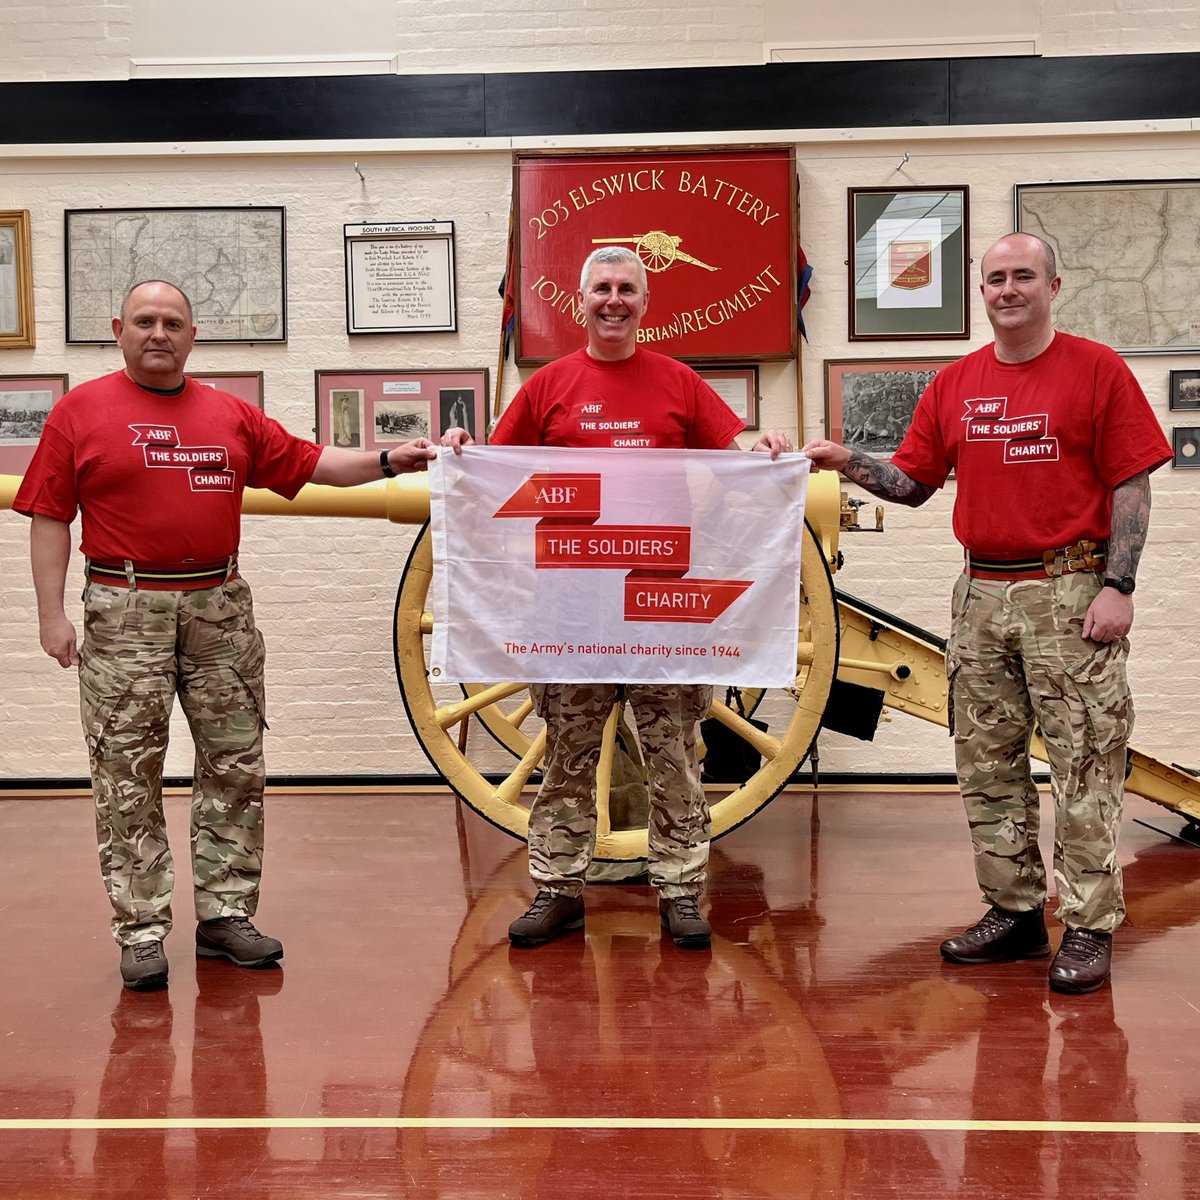 Army Reserve soldiers from 203 (Elswick) Battery based in Blyth will be in Newcastle tomorrow raising funds for ABF The @Soldierscharity 

Read more here ⬇️

justgiving.com/fundraising/gr… 

#ForSoldiersForLife #Newcastle #Blyth